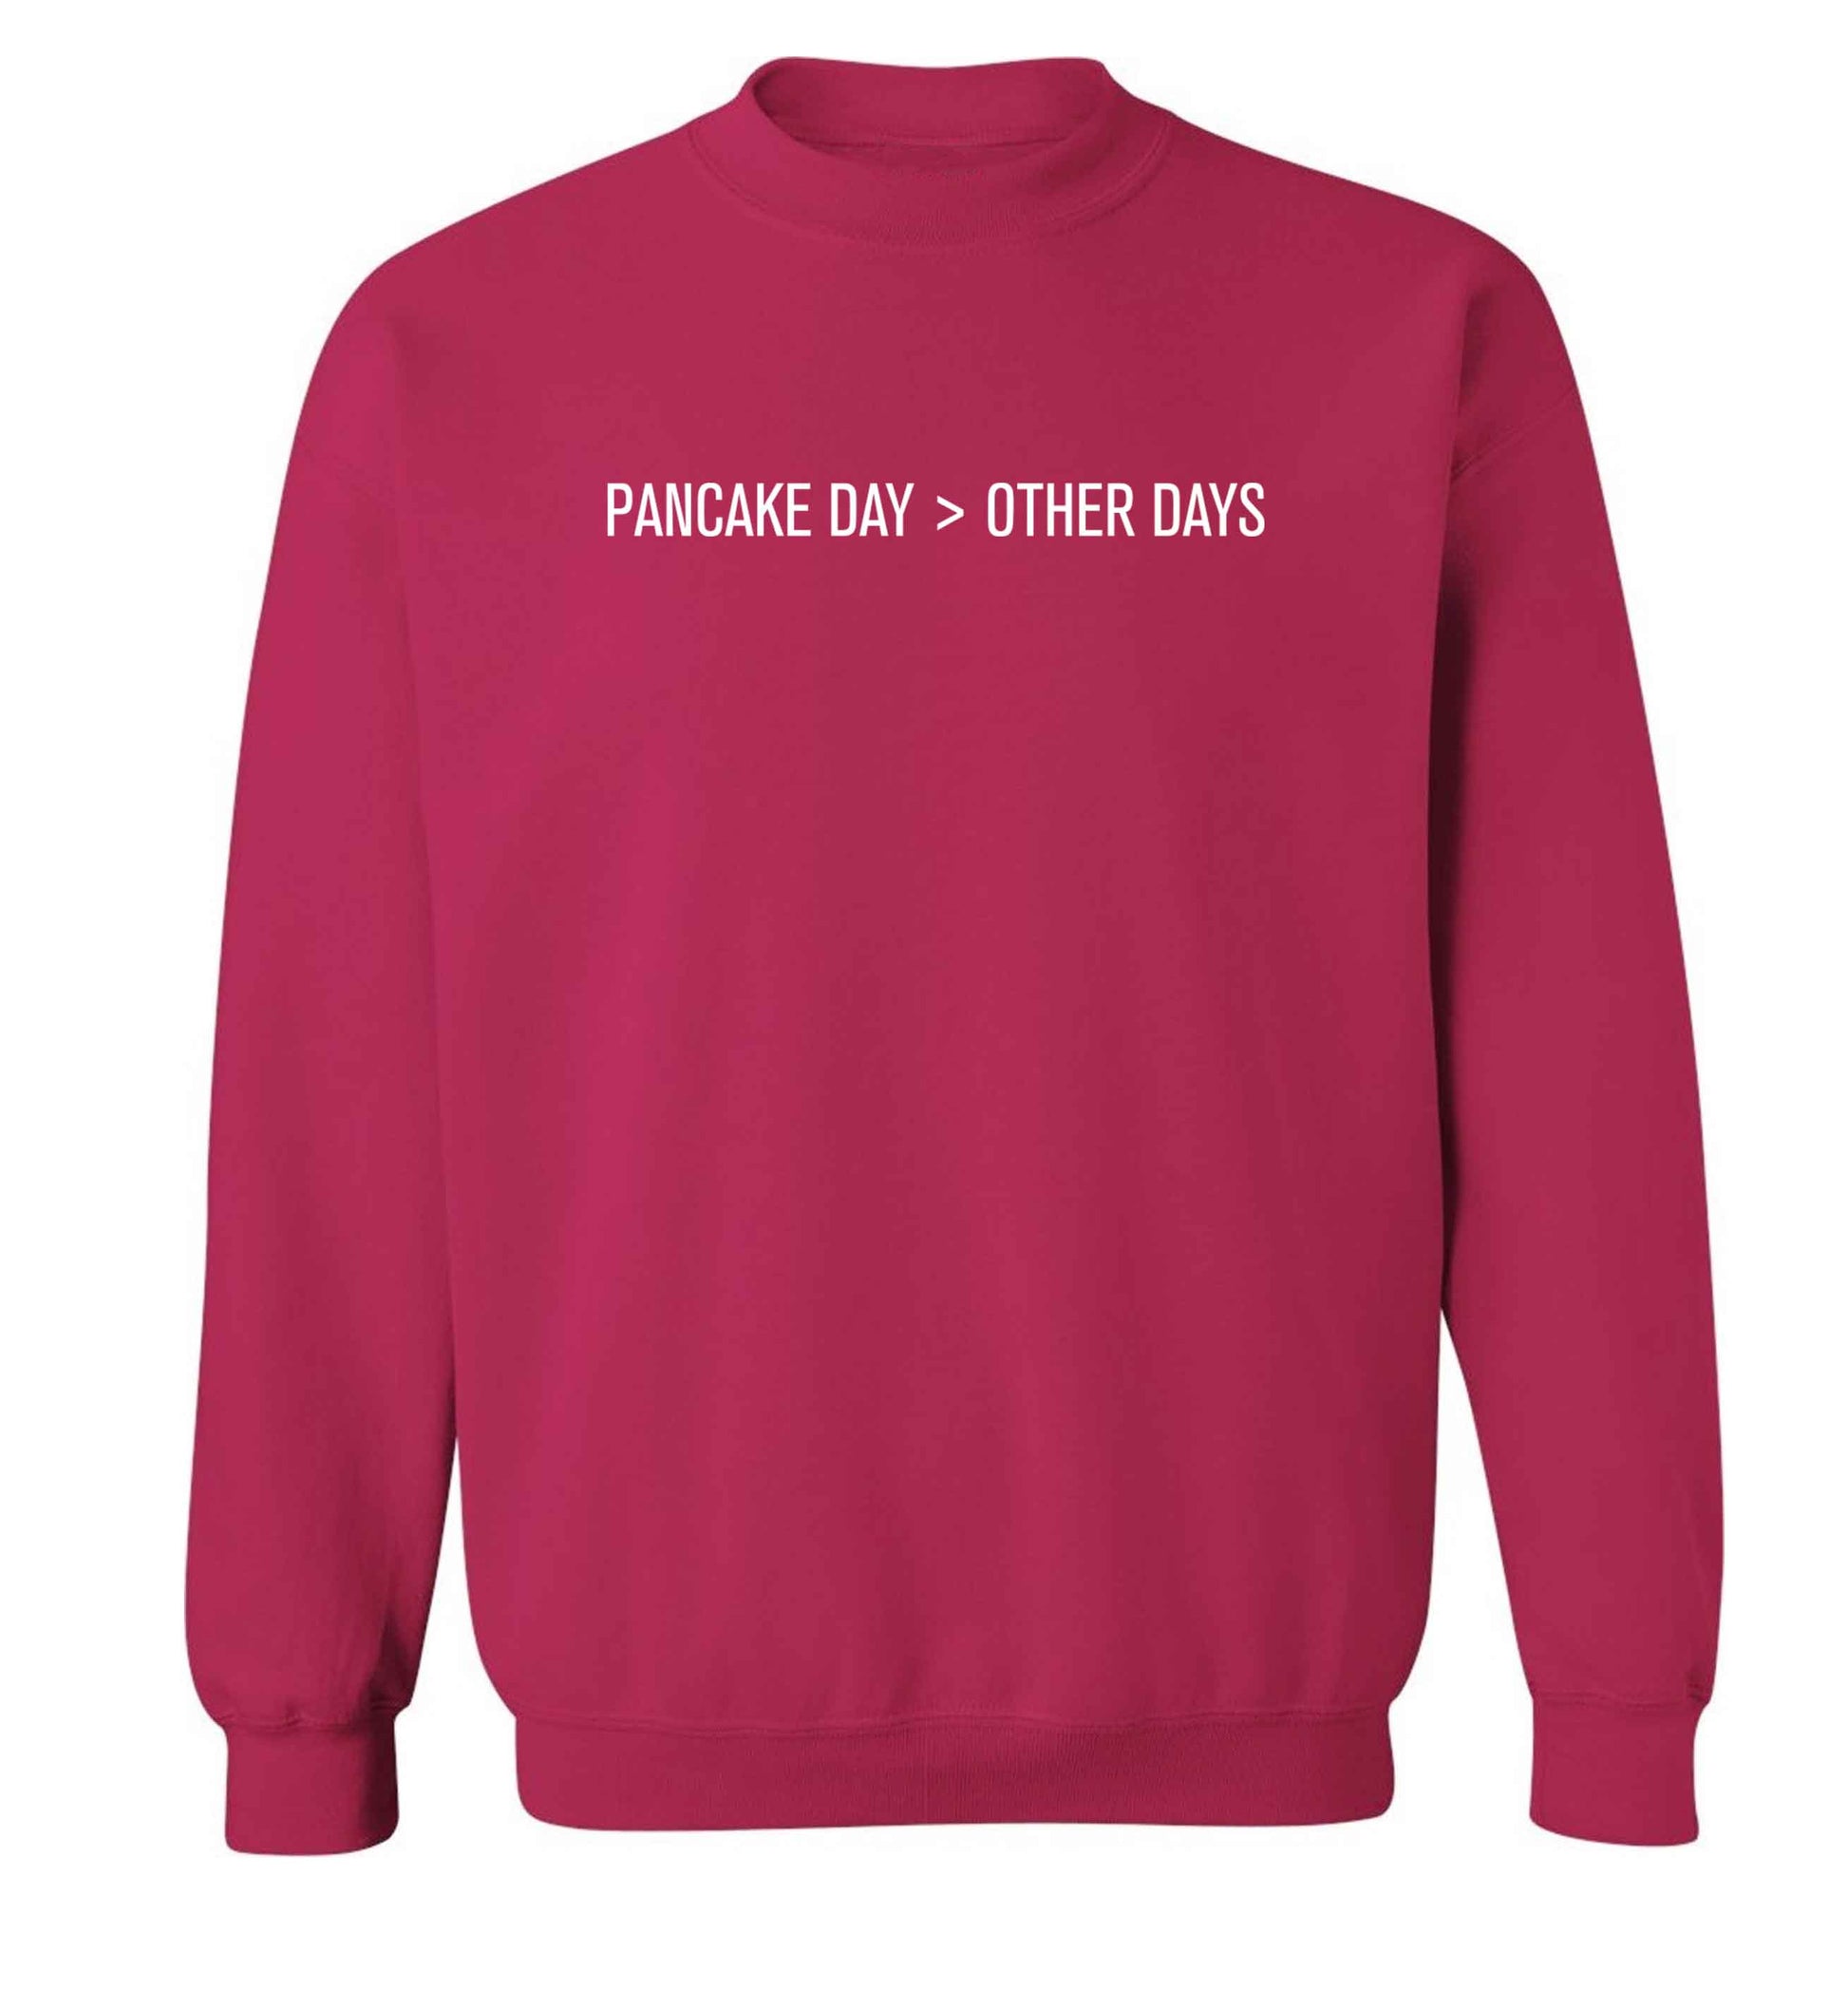 Pancake day > other days adult's unisex pink sweater 2XL